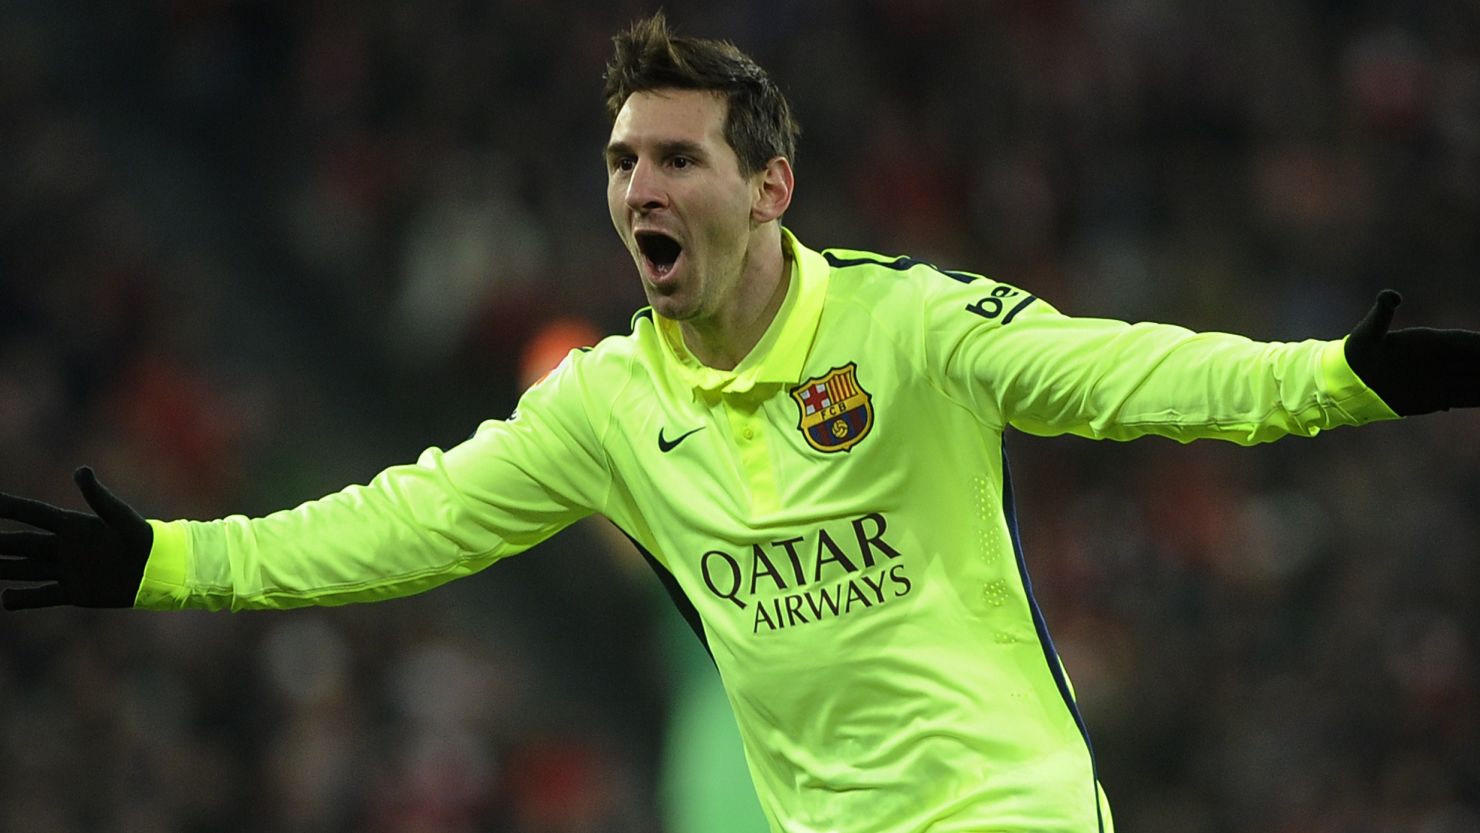 Lionel Messi celebrates his opening goal in Barcelona's win at Athletic Bilbao.